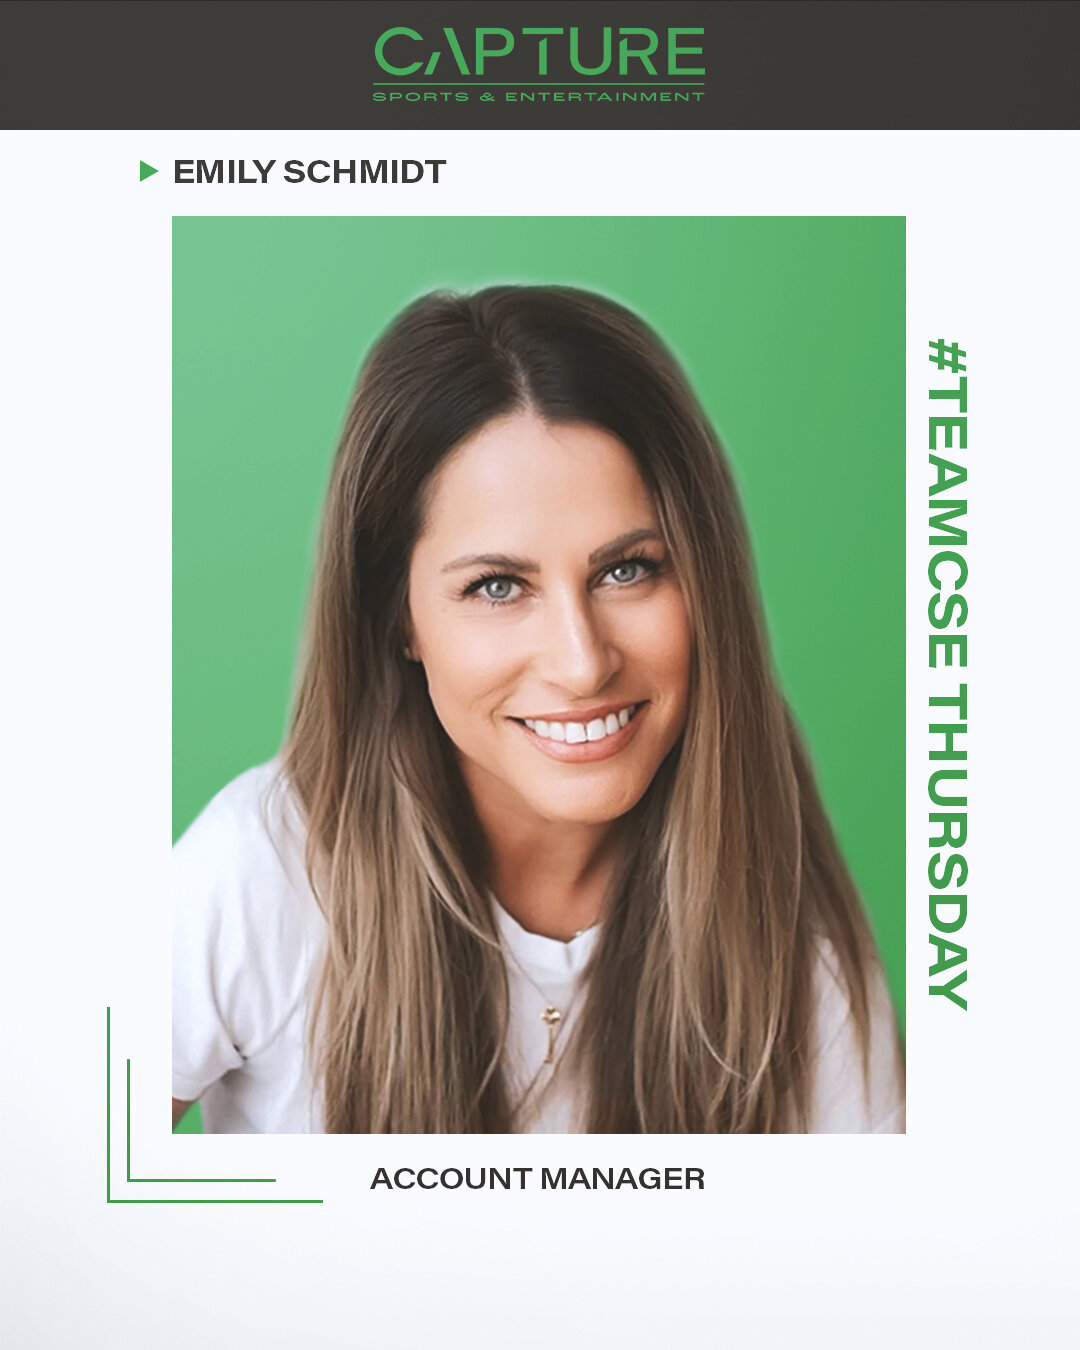 Time to meet #TeamCSE's newest member, Emily! She combines skills in marketing and personal relations and contributes to the success of high-profile projects and campaigns. 

Emily is dedicated to personal growth, family and making a difference in th